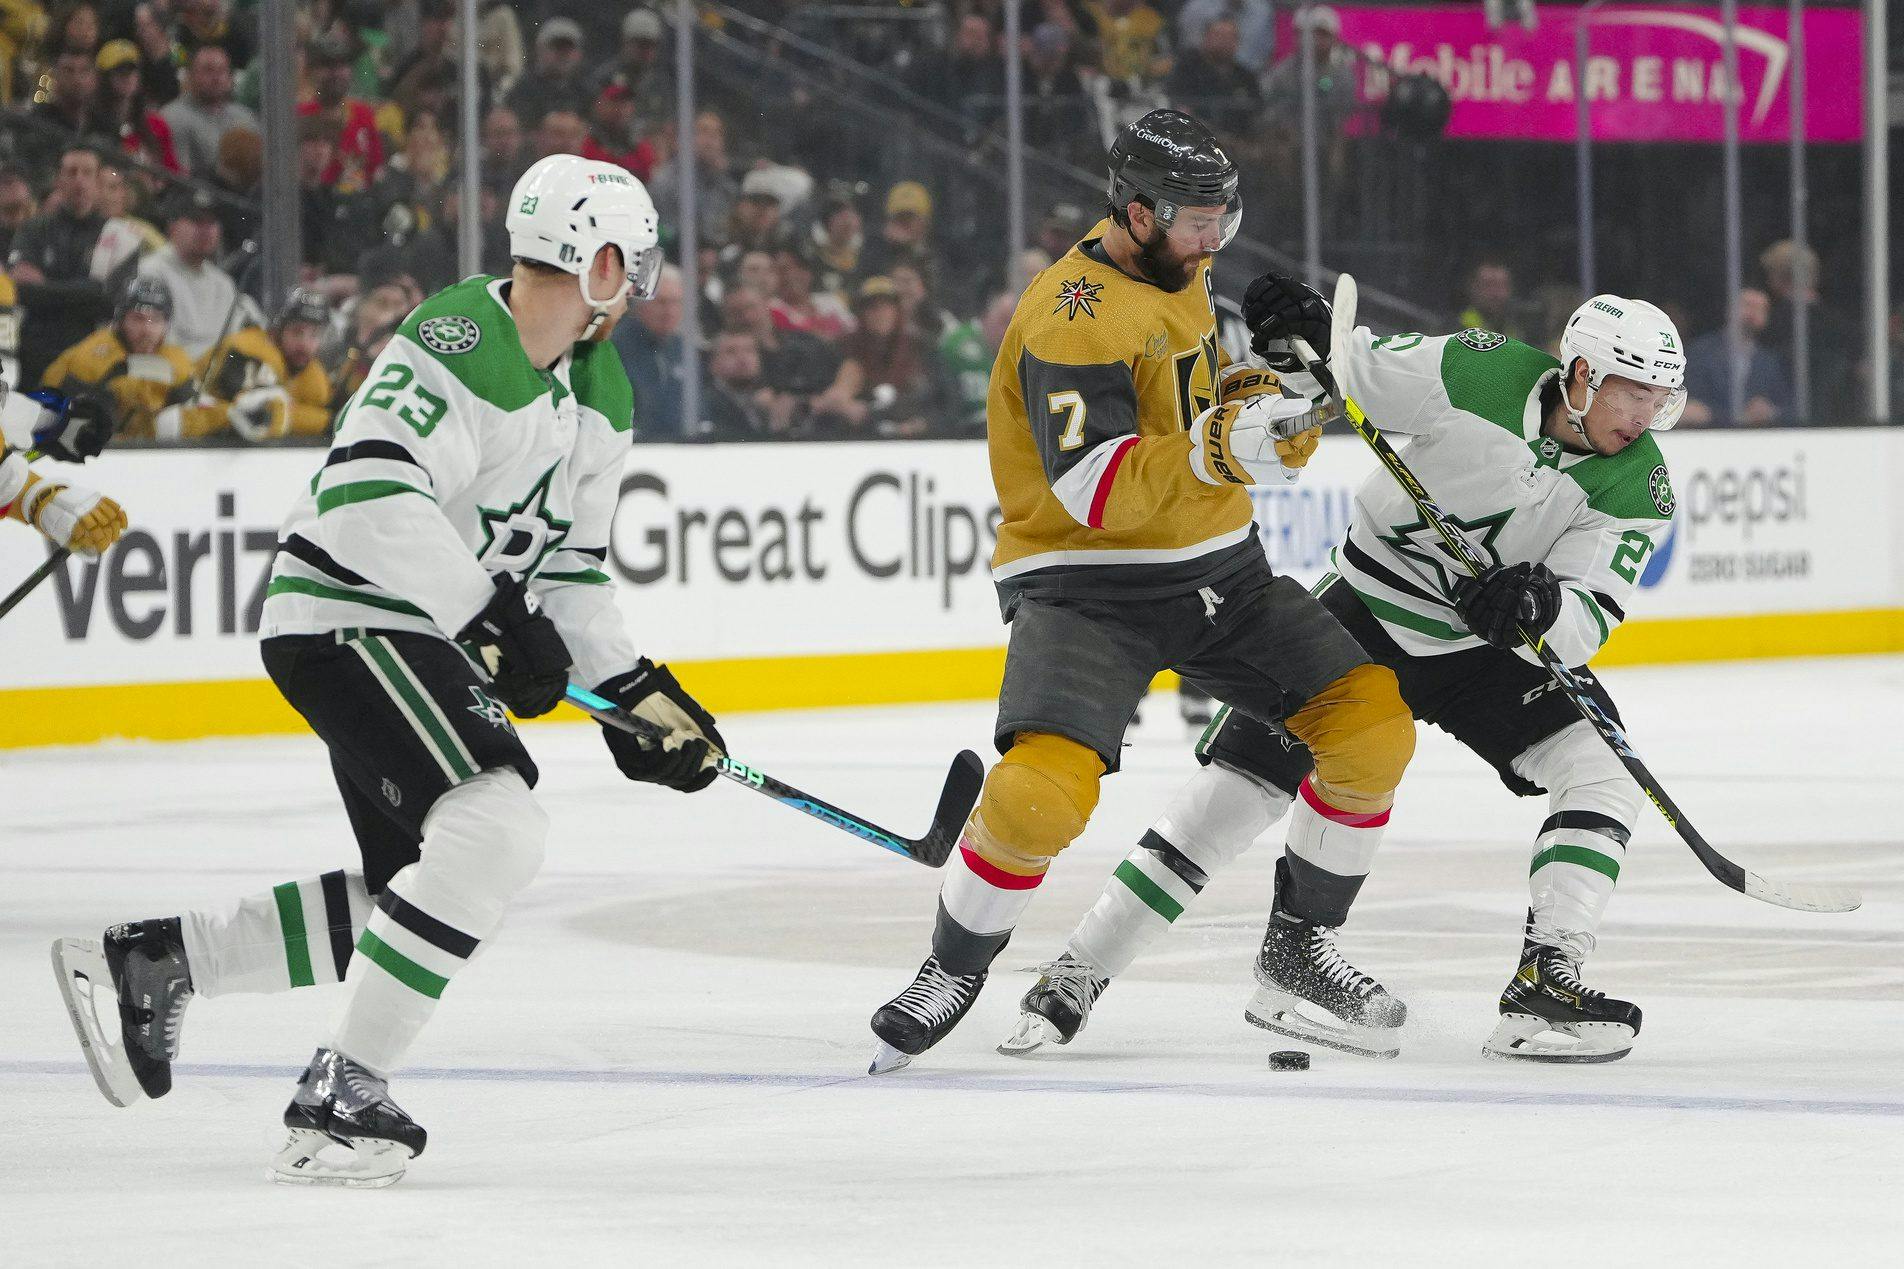 Golden Knights-Stars schedule: Full list of dates, start times for